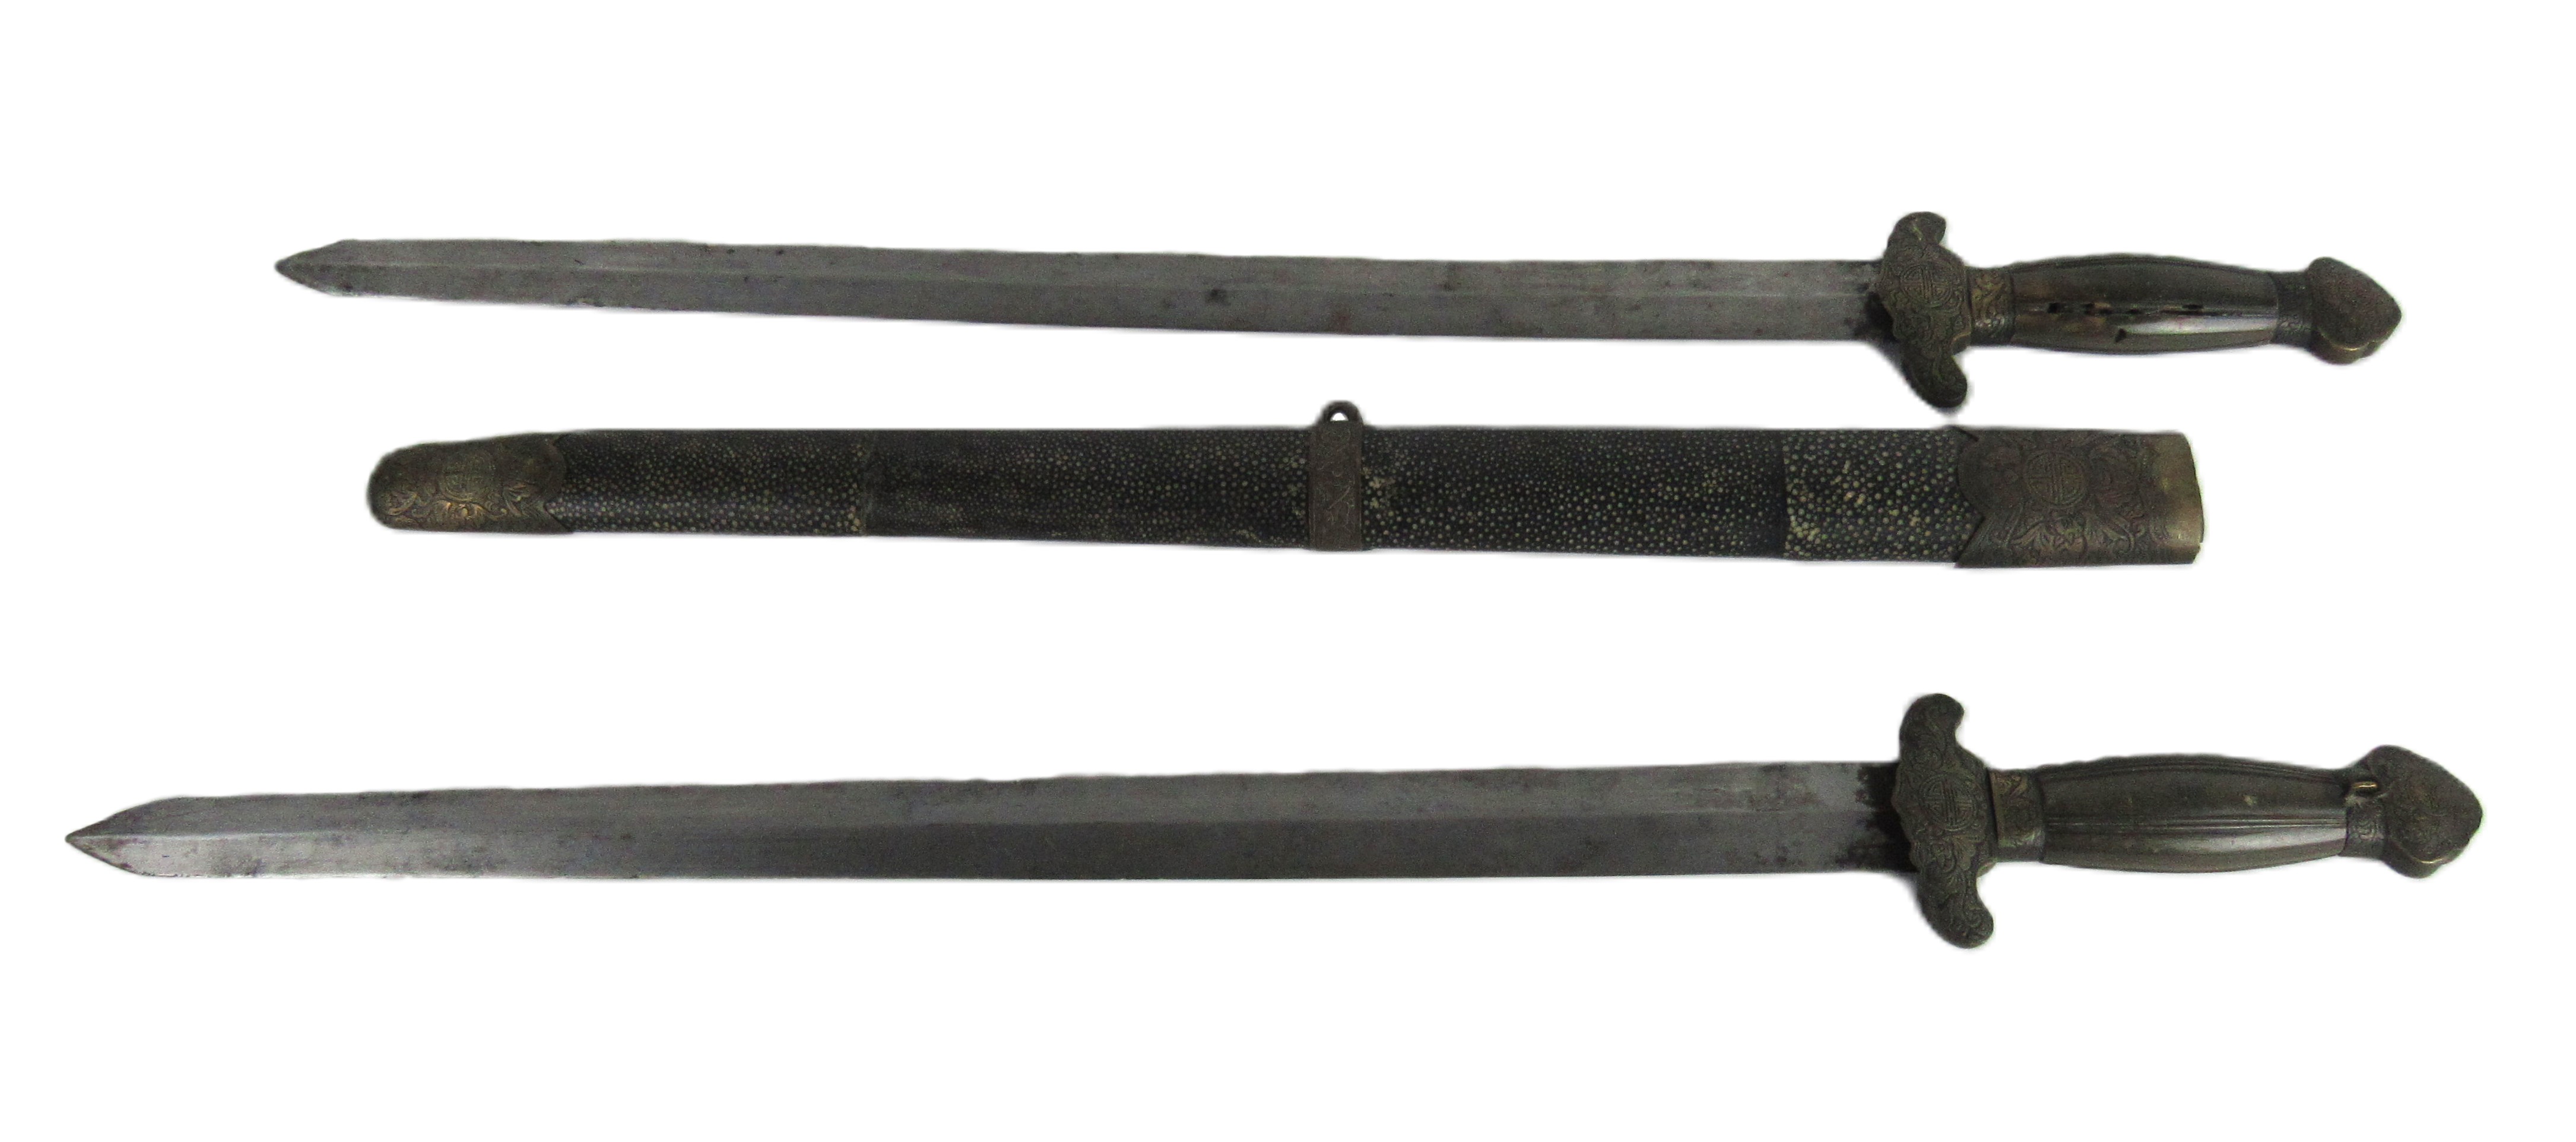 Militaria: A 19th Century Chinese double 'Shuang Jian' Sword, the shaped half handles with - Bild 2 aus 2